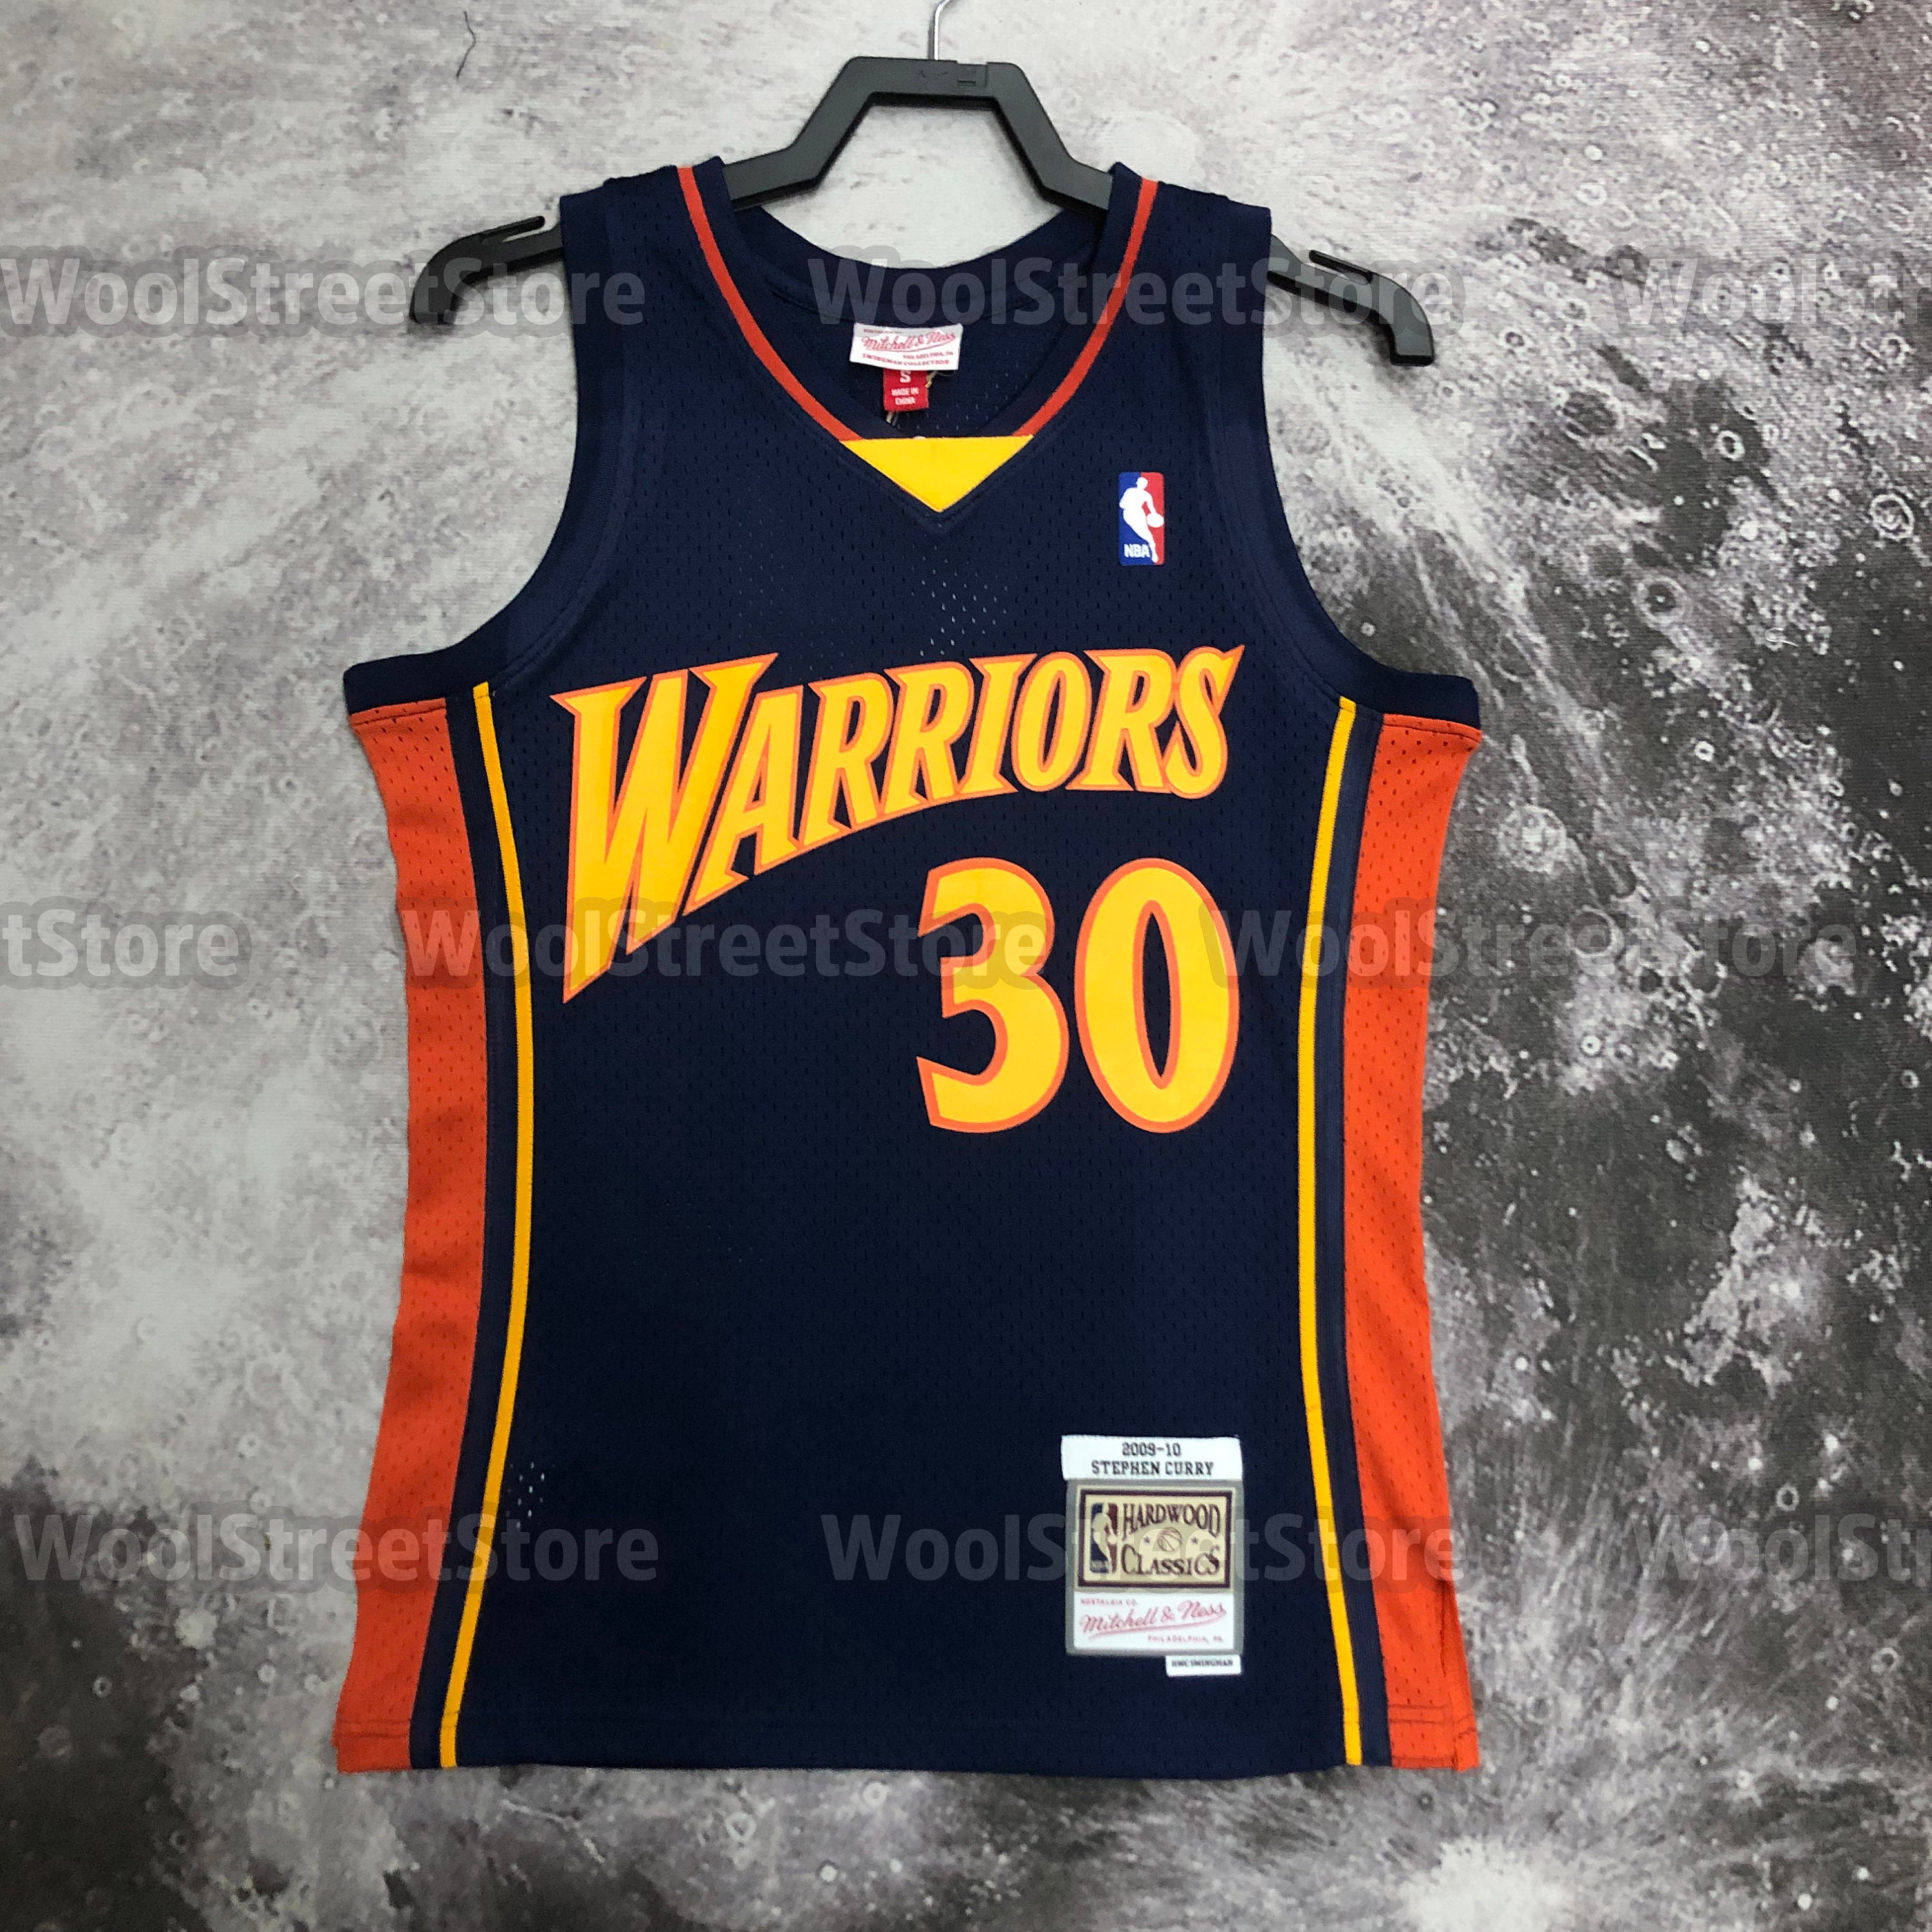 Basketball Golden State Warriors Blue Jersey Customized Number Kit –  Customize Sports